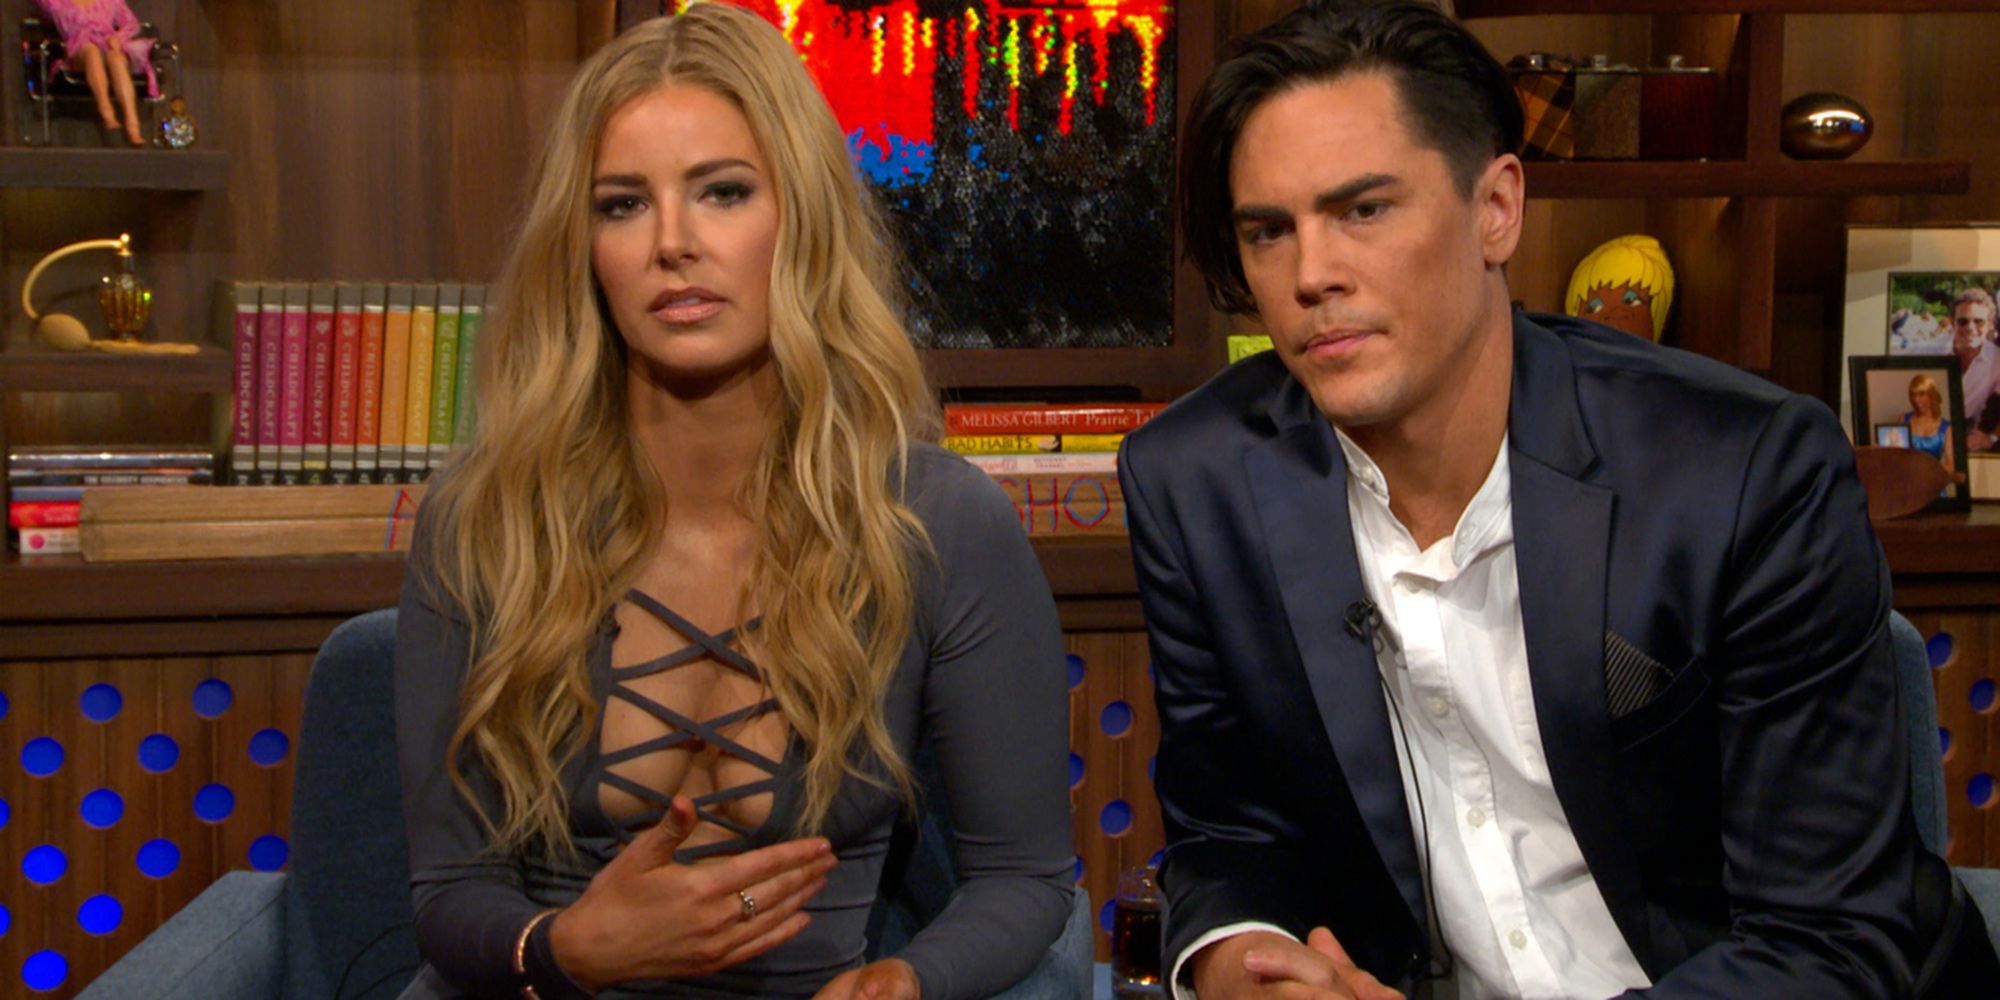 Tom Sandoval and Ariana Madix from Vanderpump Rules looking miserable together